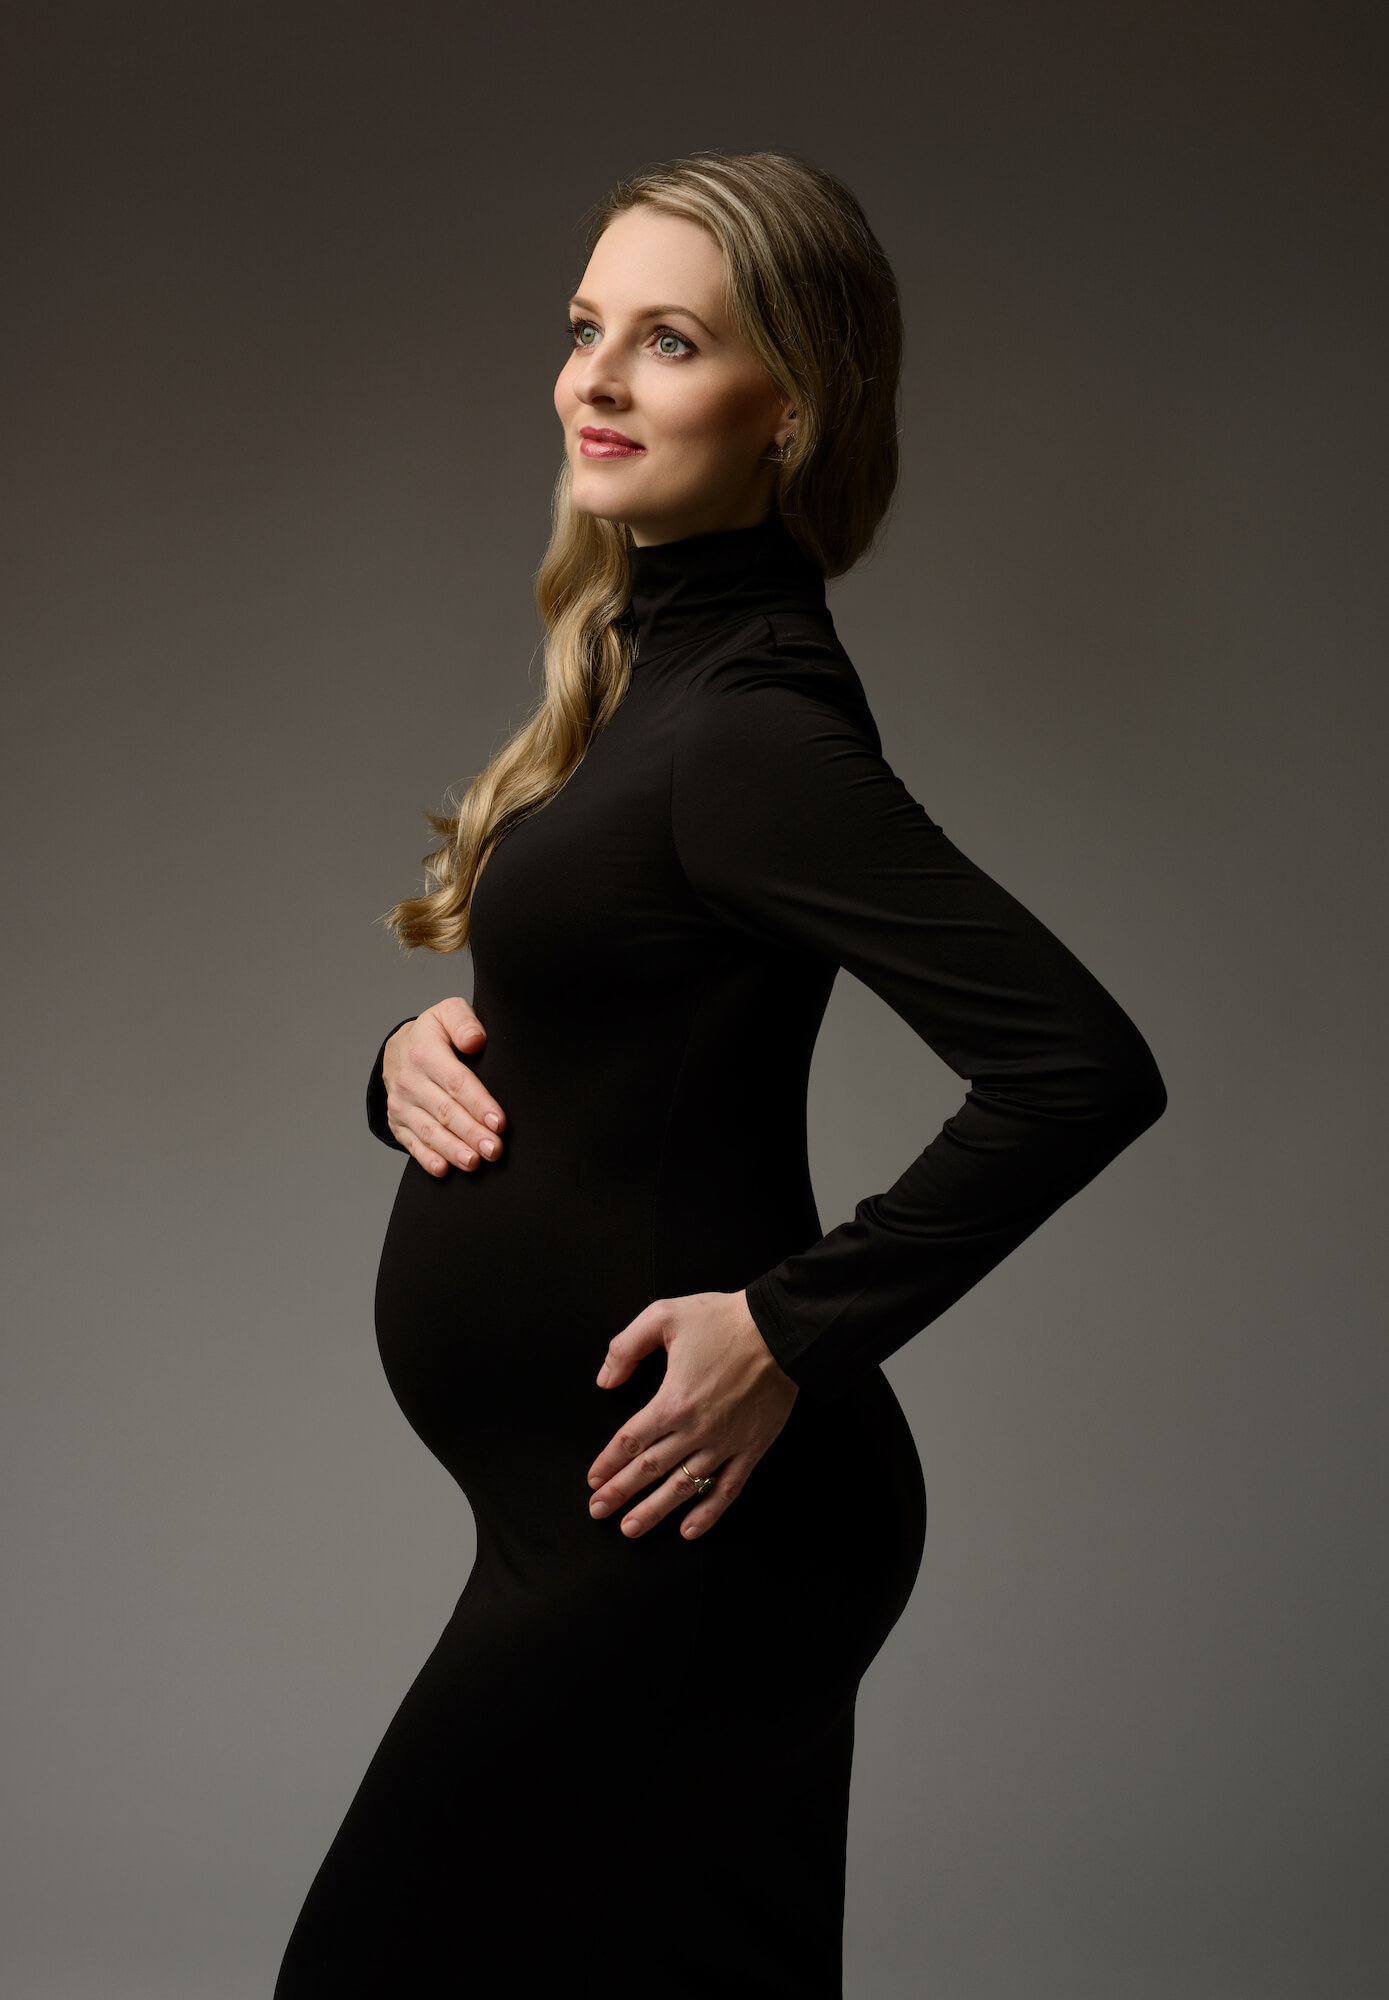 pregnancy photography near me, baby bump photography, maternity photoshoot in queens ny